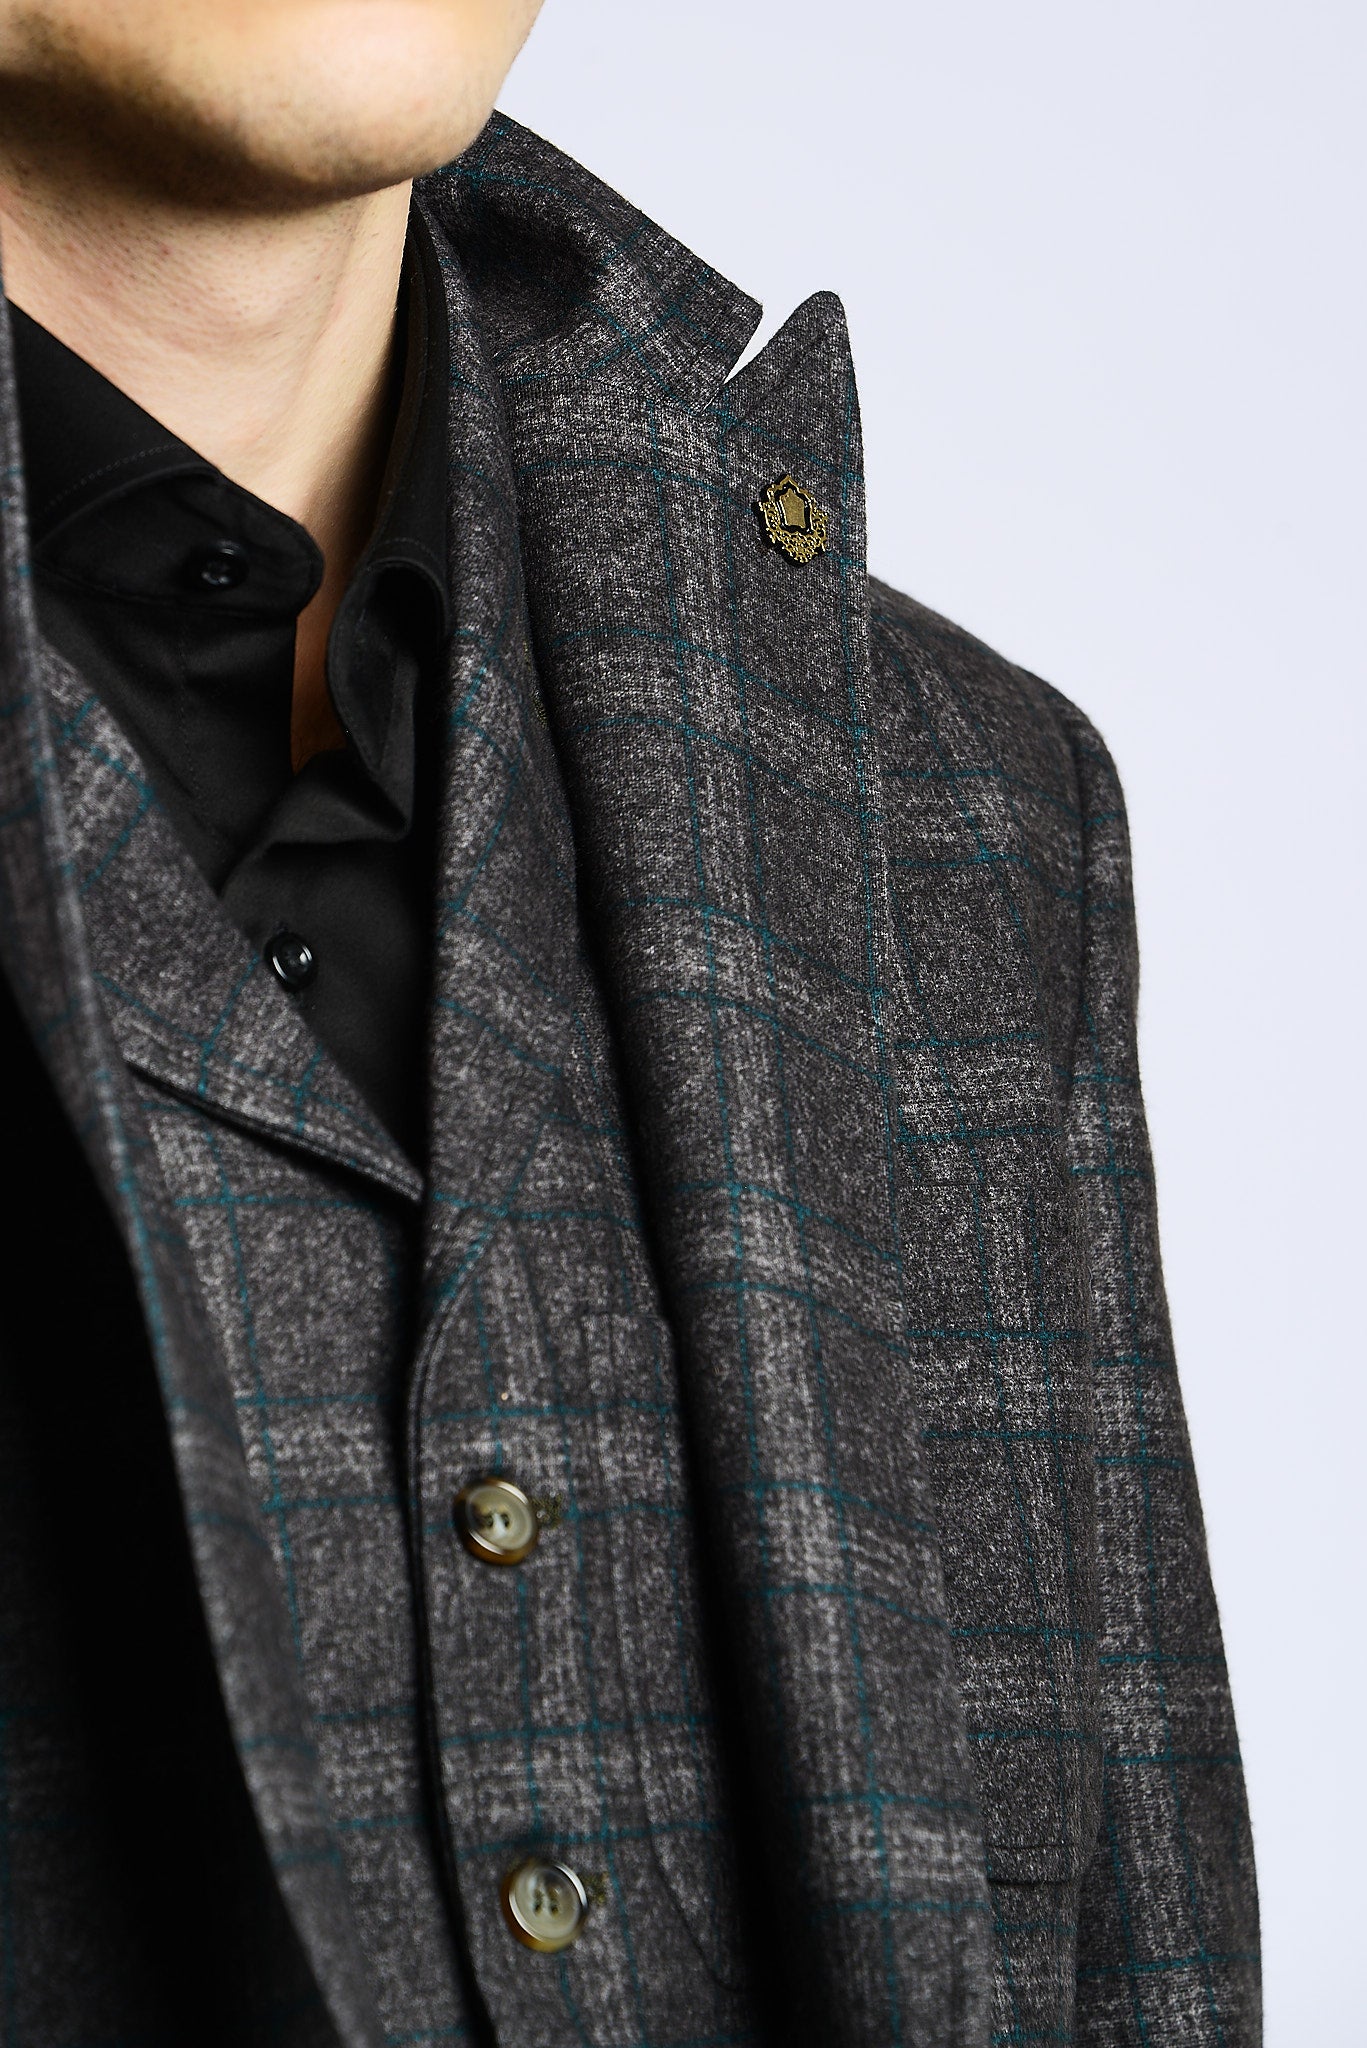 Hampstead Multi Check Soft Touch Sportcoat